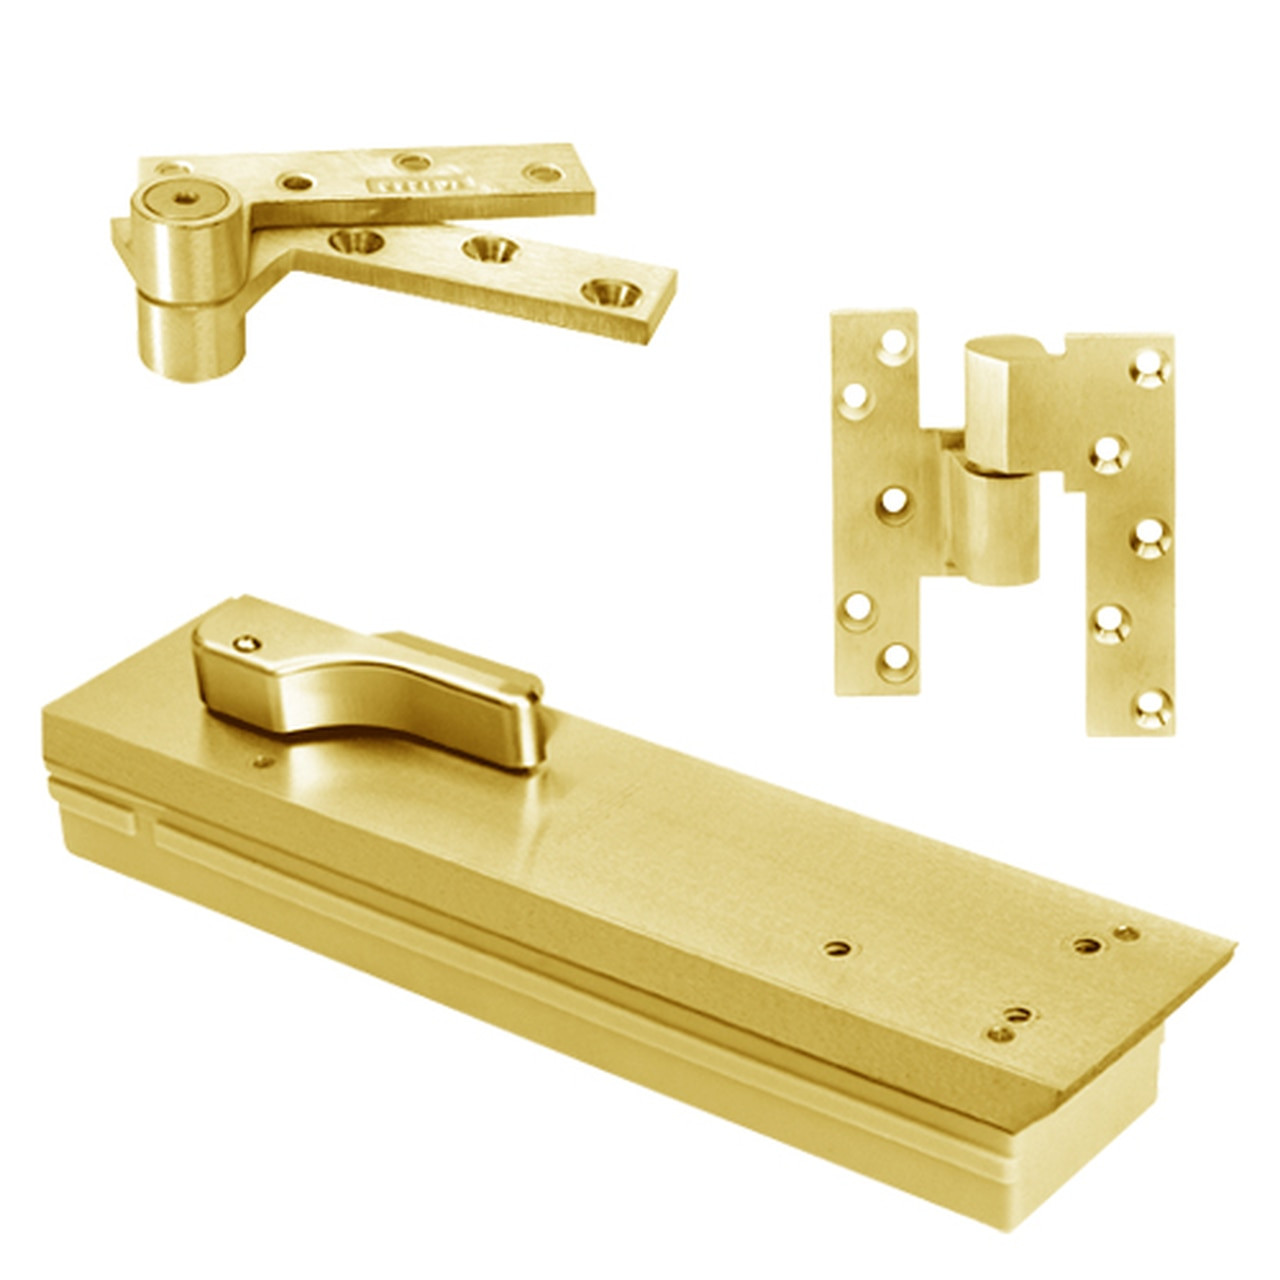 FQ5103NBC-SC-RH-605 Rixson Q51 Series Fire Rated 3/4" Offset Hung Shallow Depth Floor Closers in Bright Brass Finish